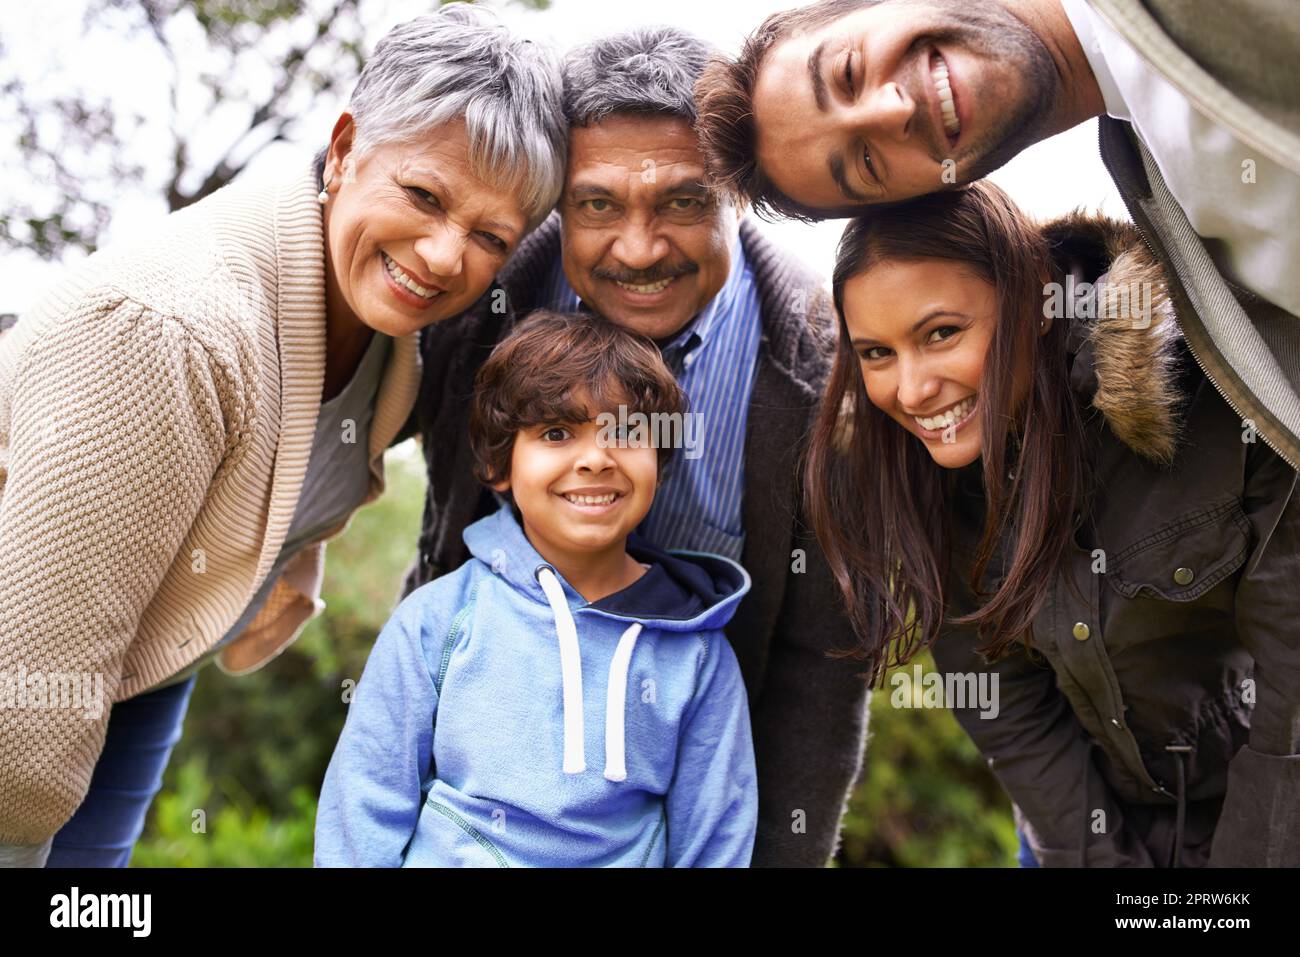 Theyre a close-knit family. a multi-generational family posing for a self-portrait. Stock Photo